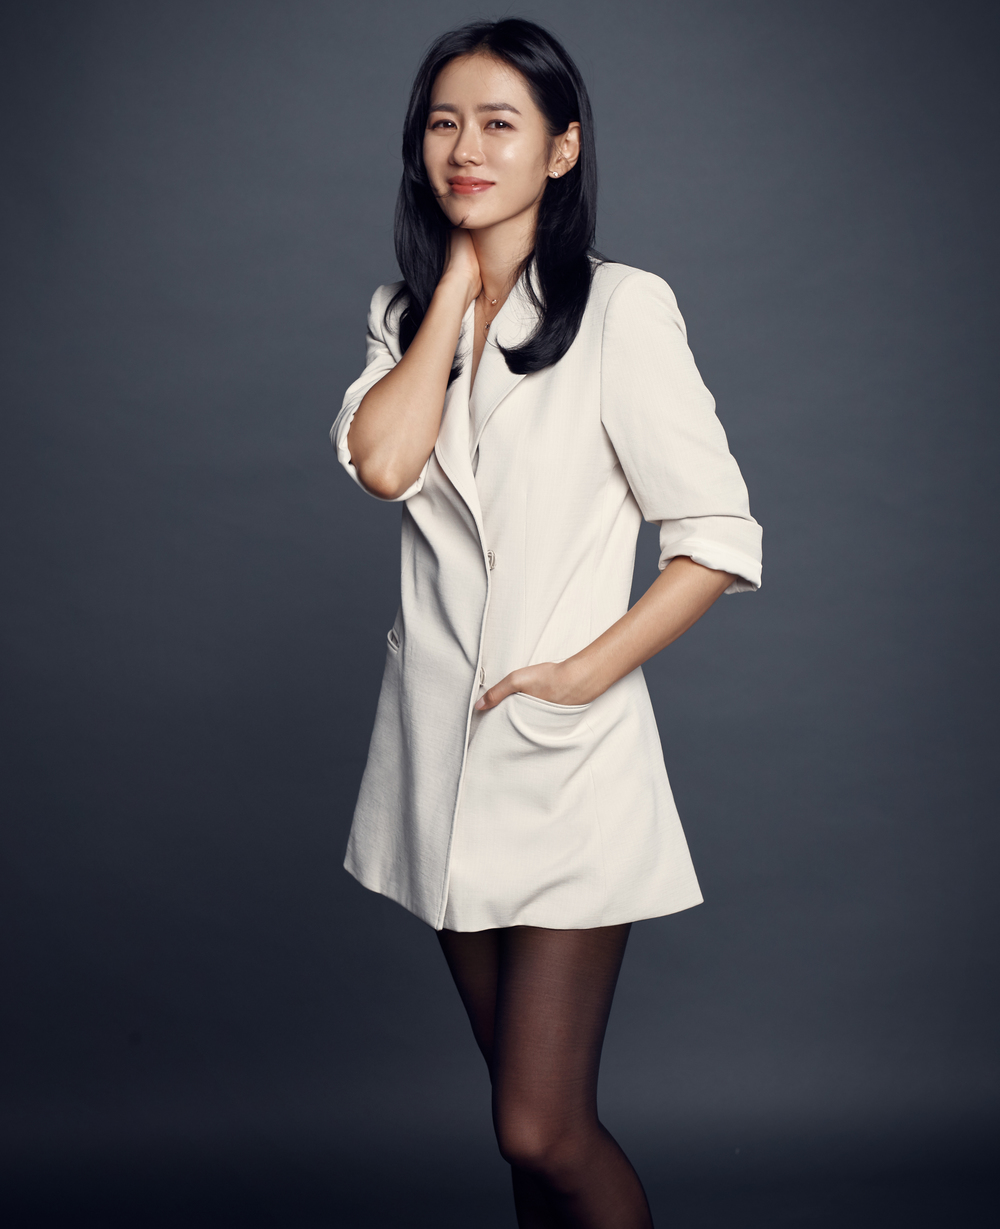 Son Ye-jin reveals why he carried out a bob hairstyleActor Son Ye-jin, who starred in the movie Movie - The Negotiation (director Lee Jong-seok), mentioned the points where Movie - The Negotiation was worried about playing the character in a recent interview.Movie - The Negotation, which was released on September 19 and is being praised, is a crime entertainment film in which the worst hostage situation ever occurred in Thailand and the crisis Movie - The Negotation begins the movie - The Negotation of the life of Ha Chae Yoon to stop the hostage-taker Min Tae-gu within the time limit.In Movie - The Negotiation, Son Ye-jin played the first domestic film to have a job called Movie - The Negotiation.It was like a challenge to Son Ye-jin because it was a profession I have never seen anywhere.Son Ye-jin said, I have never talked to the actual Movie - The Negotiation, but the director has noticed a lot of things before.Actually, there are police officers specializing in Movie - The Negotiation in our country, so I met them and heard about them and said that there was someone who actually helped them.The director told me about it and gave me a book.Movie - The Negotiation Theory, Movie - The Negotiation I gave you about four books about the Negotiation, and I indirectly experienced Movie - The Negotiation, he introduced the process of creating characters.Ha Chae-yoon, played by Son Ye-jin, is a man full of humanity before he was Movie - The Negotation: a cool, yet humane cop.No matter how easy Son Ye-jin was to express such a character.Son Ye-jin said, The character Ha Chae-yoon has a job called Movie - The Negotiation, but he is a human figure.How do you feel like Ha Chae-yoon, who was first encountered in the scenario, or a police officer, Movie - The Negotiation, can be more attractive and more sympathetic, and make your sense of duty as a professional.I was worried about finding the contact point because I did not have the charm to go with just the sense of justice unconditionally. The director said that the actual Movie - The Negotiations are much closer to the hostages and there are many points that make sense.The mind goes further to the hostage takers side: when you talk about them, you listen to them and you do Movie - The Negotiation.I think that the focus of the character Ha Chae-yoon is more on how human and hot he is. He had made a lot of effort outwardly, and now Hair was growing up, but he turned into a hairstyle to make professional police characters more realistic at the time.Son Ye-jin, who decided to appear in the melodrama Im going to see you now, but who is known to have made a bold bob, said, I imagined that he was acting with his long hair as he happened to be first.When I put on a police uniform or a shirt with long hair, I put a net on Hair, but I did not like the appearance of catching the character by that alone. No one told me to cut it.But I do not want to answer this, so I just cut it because it is big for external changes even in such a part. I cut it shorter than I thought, but I had to keep it, because its happening in 12 hours, but it was so fast that Hair was long that I had to keep trimming.Son Ye-jin, who started filming Movie - The Negotation after shooting Im going to meet you now, said, The result was fortunate that I should have given a conversion point because it was a past and present story.In fact, the director of Im going to see you now wanted a long hair, but anyway, I am glad that it is more natural to put a hair on I am going to meet now .Above all, Movie - The Negotiation is attracting attention as a different shooting technique called dual shooting.Movie - The Negotation is a movie that gives a different kind of fun by leading the drama with the 1:1 real-time confrontation between the Movie - The Negotation and the hostage.So Son Ye-jin and Hyun Bin had to watch each other through the monitor without facing each other directly.Son Ye-jin, who has a considerable acting career, was also surprised by the strange shooting method.Watching the scenario, someone would shoot first or mix in the middle, and see it on the monitor? I imagined how to shoot it.Anyway, I never heard of it, I did not think it was because I did not imagine it, but when I told him how to shoot it later, I decided to do it.It wasnt clear then; the filming teams must have been afraid that we were writing all the techniques we didnt do that much in all the gods we do.It was a strange and difficult task, as expected. I met and took a test, but I didnt know.Anyway, it looks like a monitor, so I can not see all the subtle things that actually breathe and shake my eyes.I was worried about it, but I had to sit at my desk and face my opponent and take it step by step from start to finish. I was worried that I could lose my breath even if I missed a little tension.As the story progressed, I had to keep my breath extreme, but I was tired. I had to breathe until the end of the movie.Suddenly, if you have a little energy or get tired, I thought that those who watch movies will be immersed in the moment and the immersion will fall.I thought it would be a big deal, so I looked at my breathing again, but it was not that when I saw it the day before.However, if you keep up, it is difficult because there is no control of the strength, so I thought, At this moment, Ha Chae-yoon should be more cool.I took a month and a half, but it was really hard to control and maintain my emotions. Unlike concerns, Movie - The Negotiation is a real-time dual shot that has succeeded in conveying a vivid sense of reality that reminds us of the actual situationbak-beauty